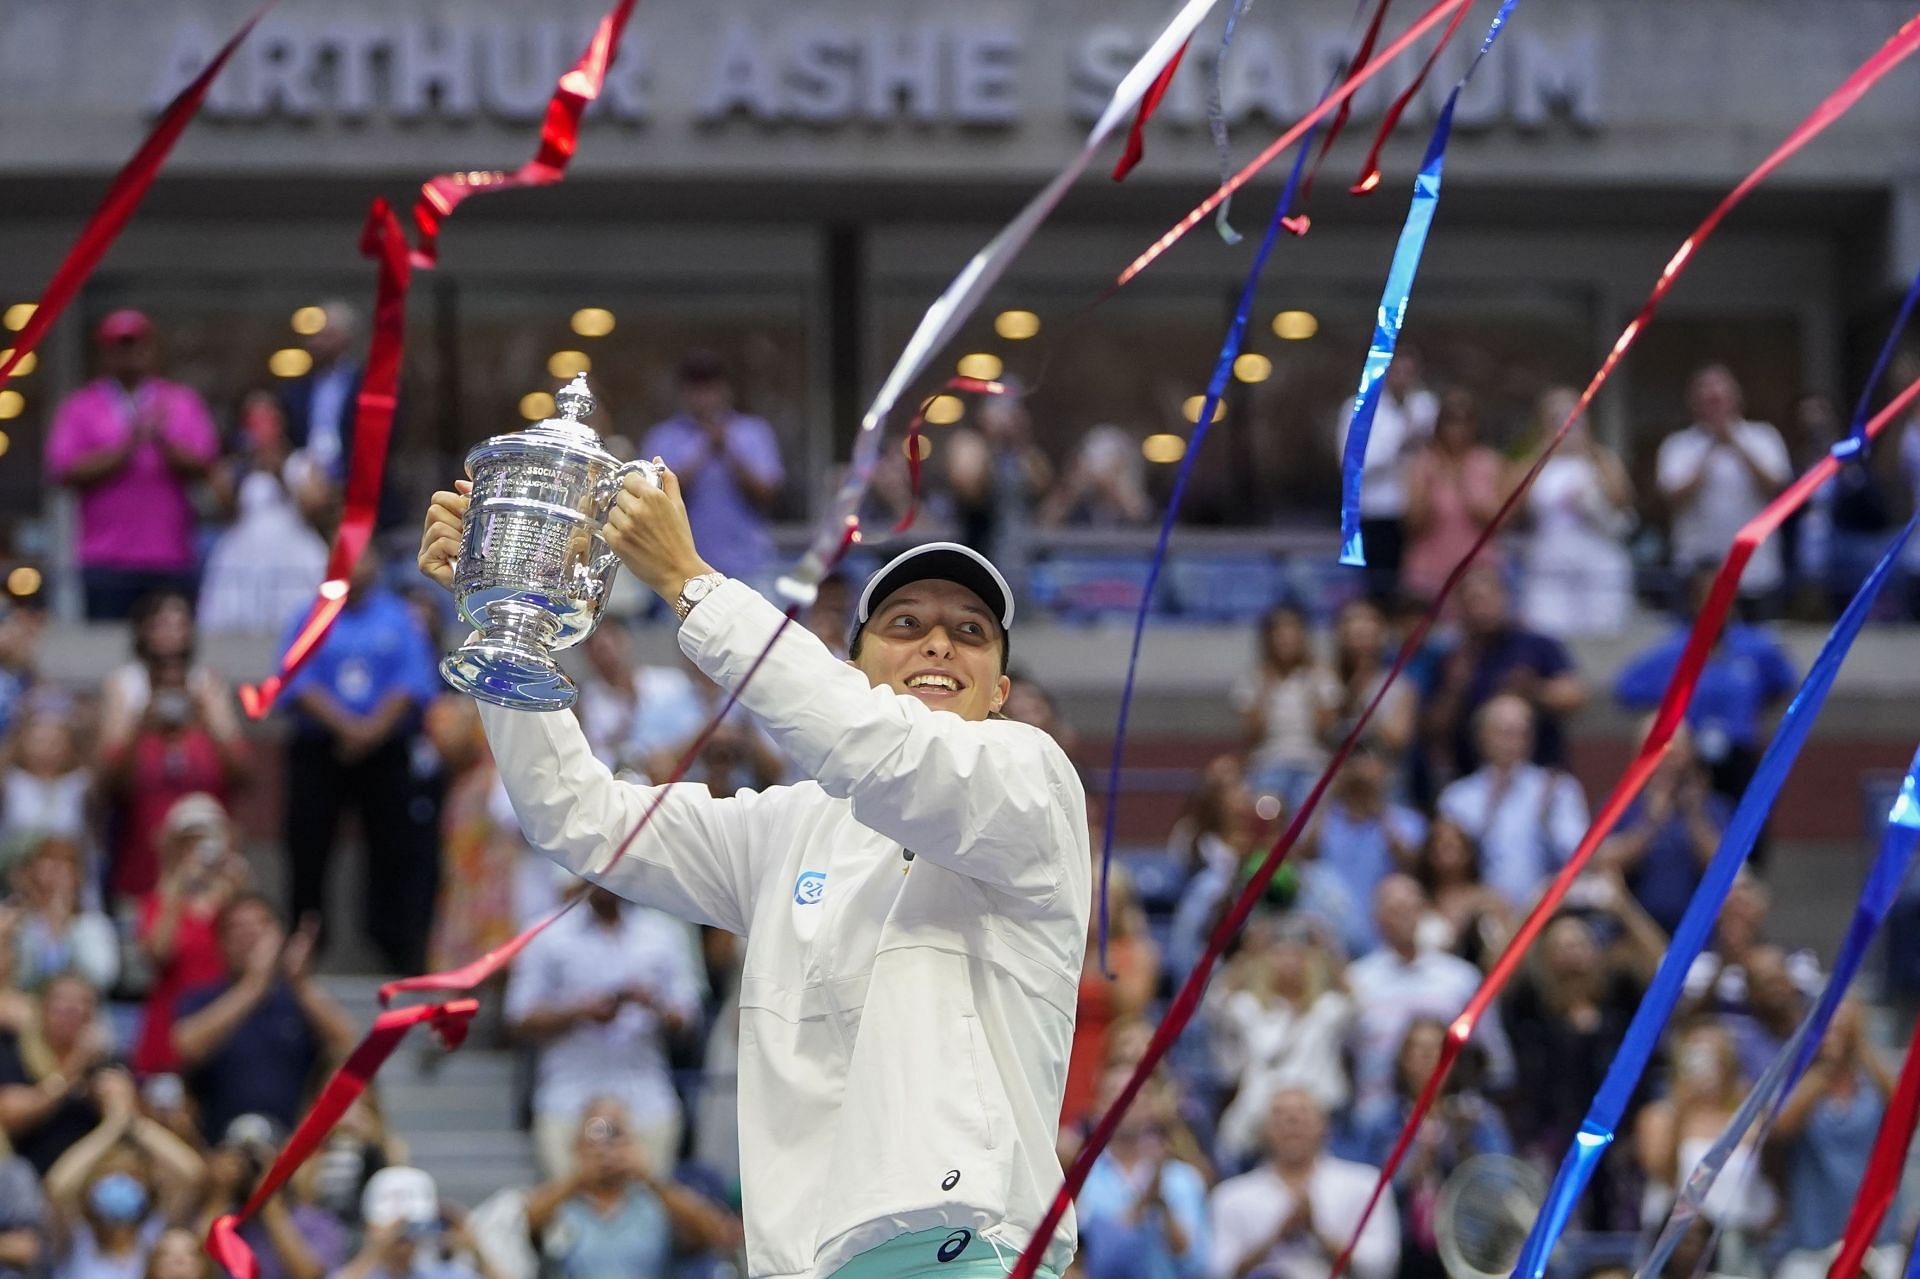 Iga Swiatek after winning the 2022 US Open trophy beating Ons Jabeur in the final